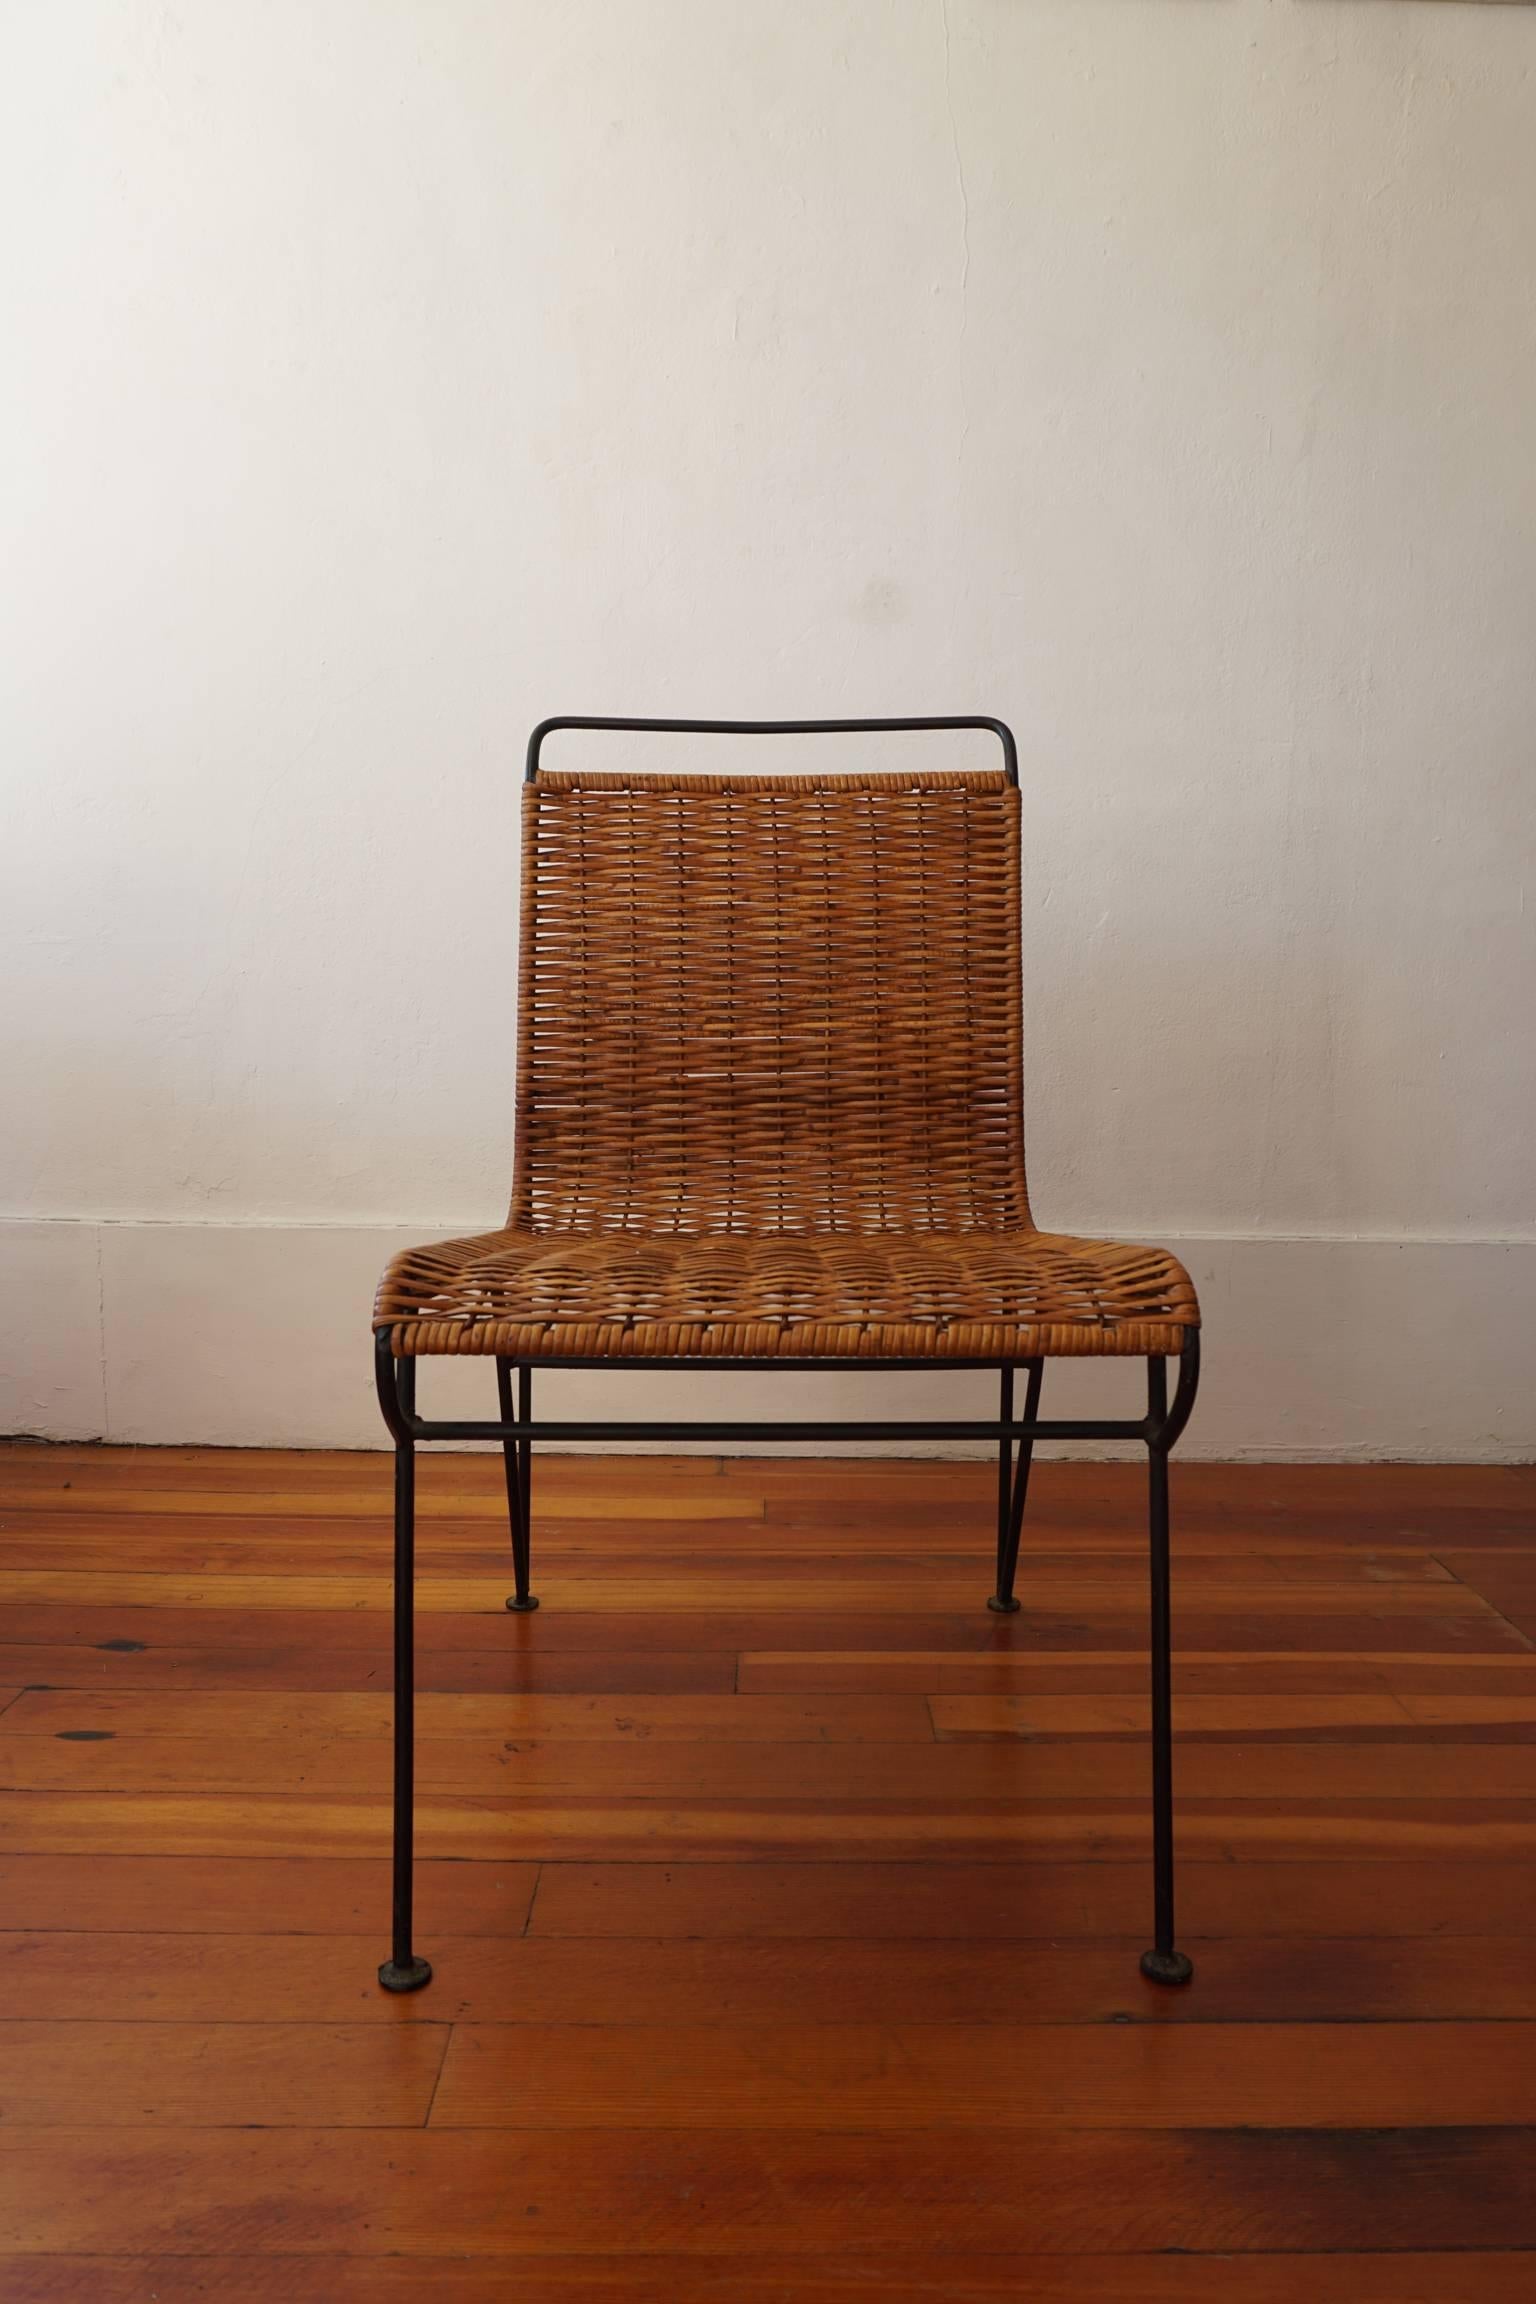 Mid-20th Century Pipsan Saarinen Swanson Iron and Cane Chair for Ficks Reed, 1950s